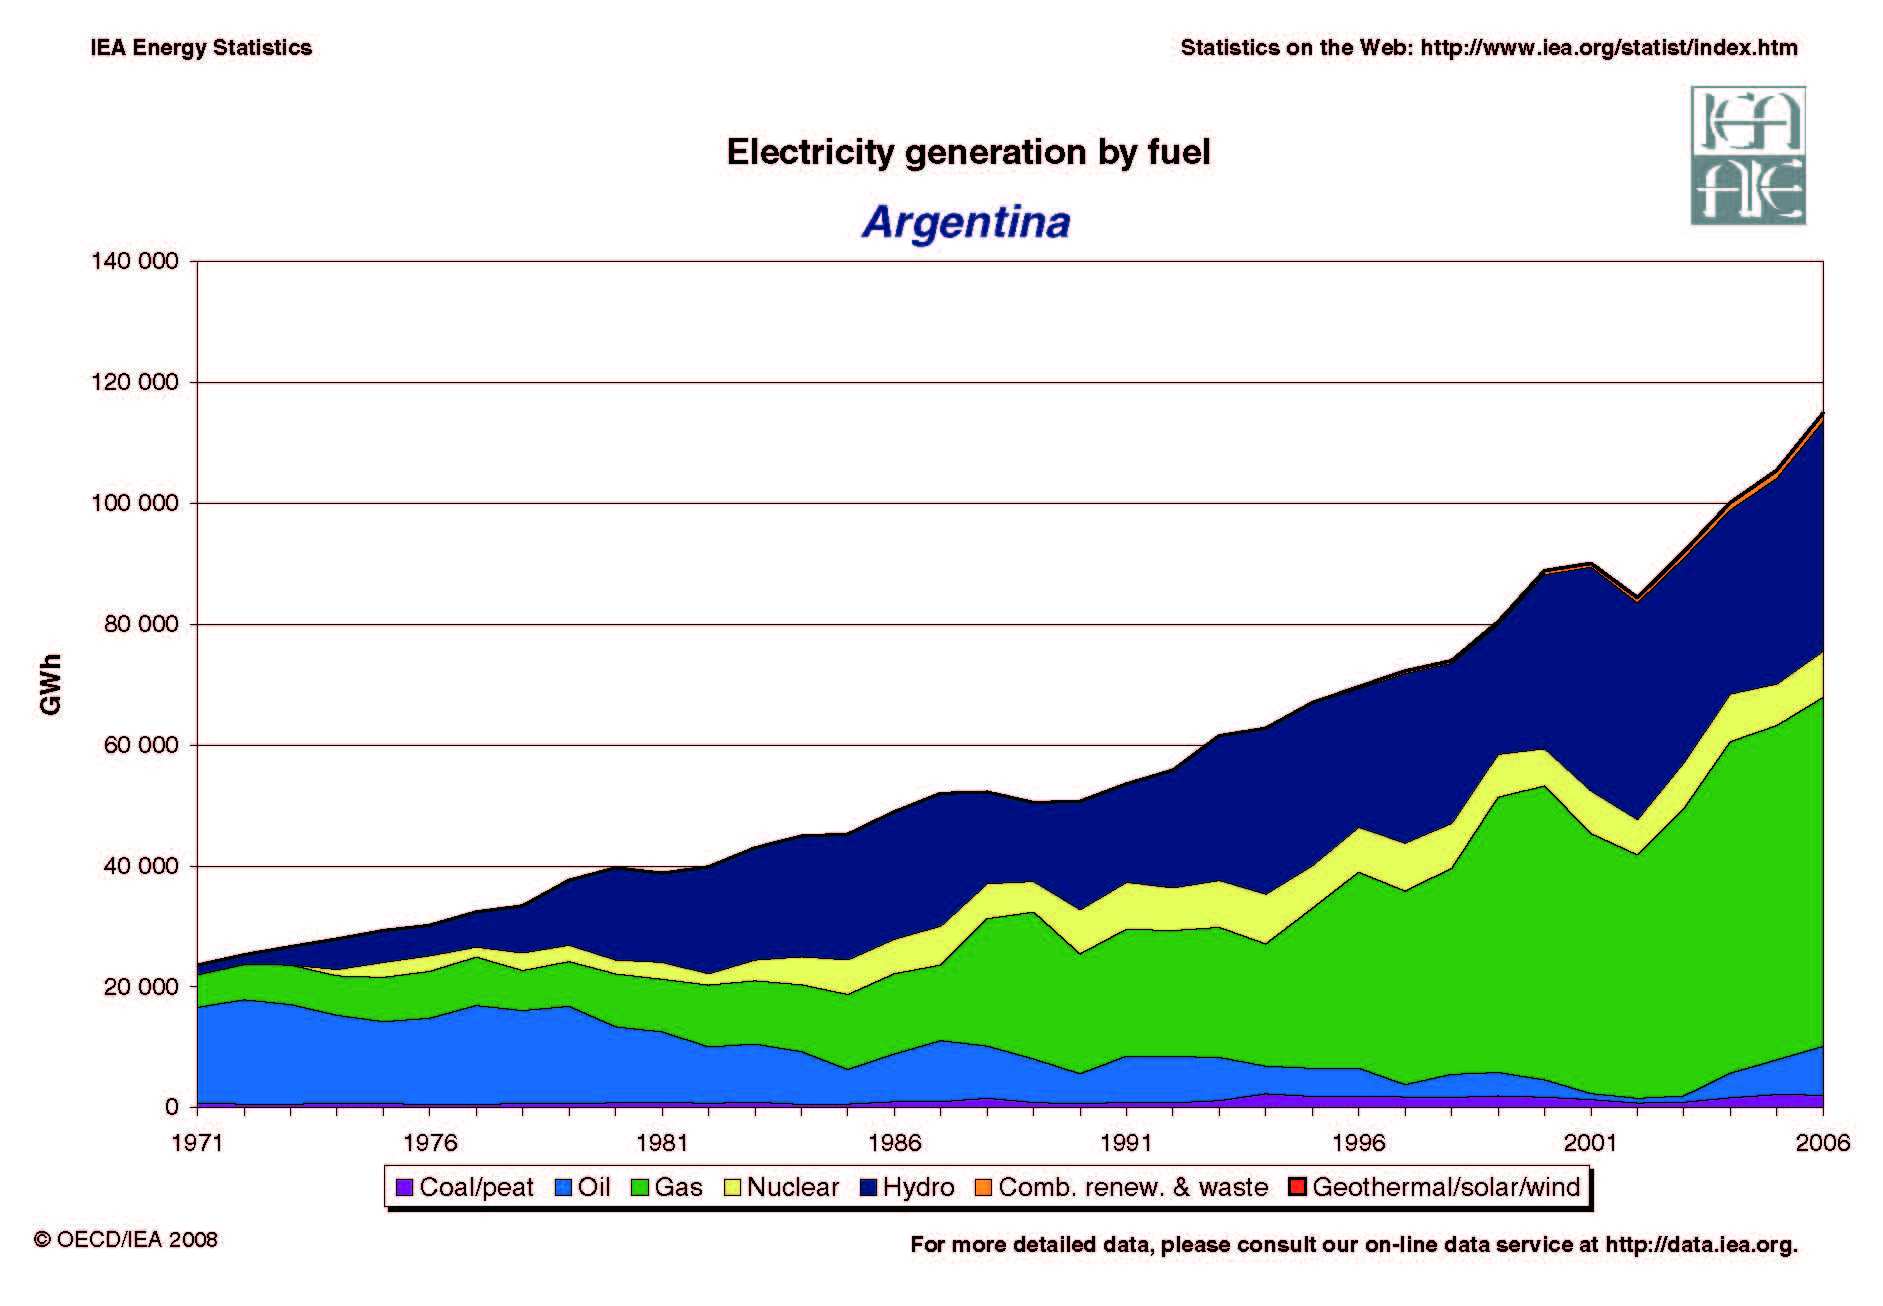 Electricity generation by fuel - Argentina